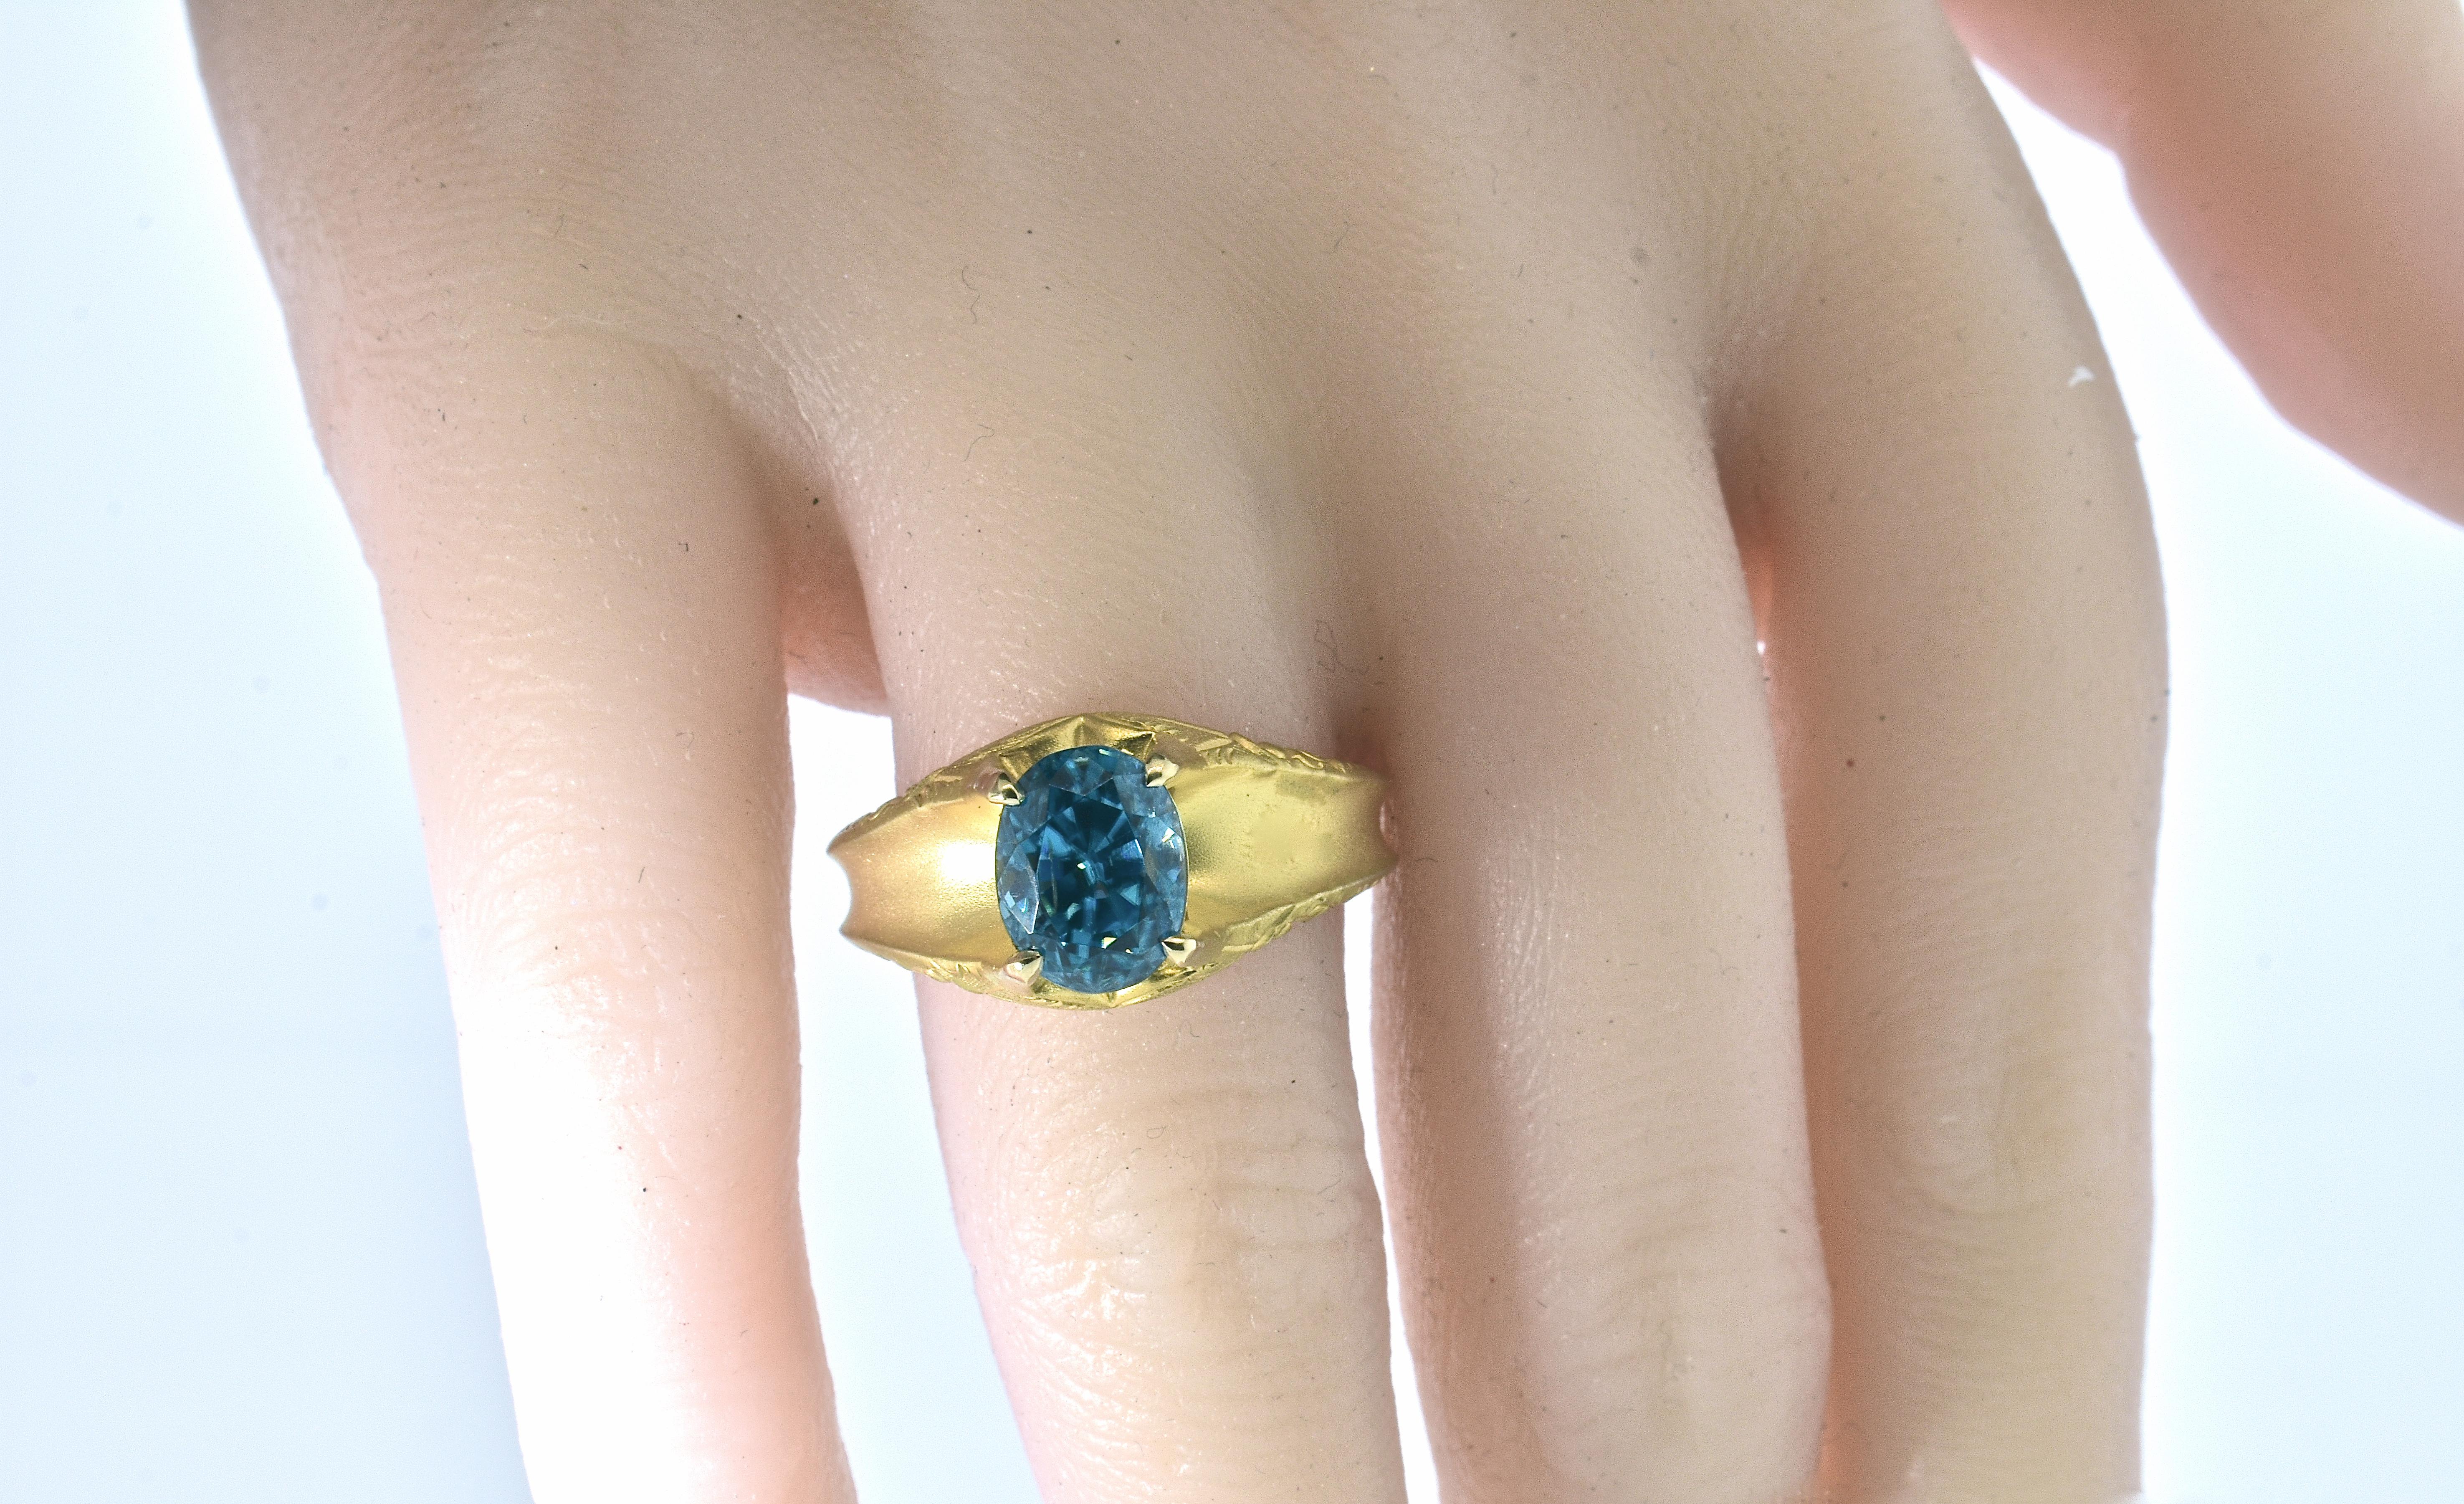 Antique Victorian 18K gold ring centering a very fine natural blue zircon weighing an estimated 7.50 cts.  This oval stone is intensely brilliant and a vivid blue color and free of inclusions. This Victorian ring is from the last quarter of the 19th